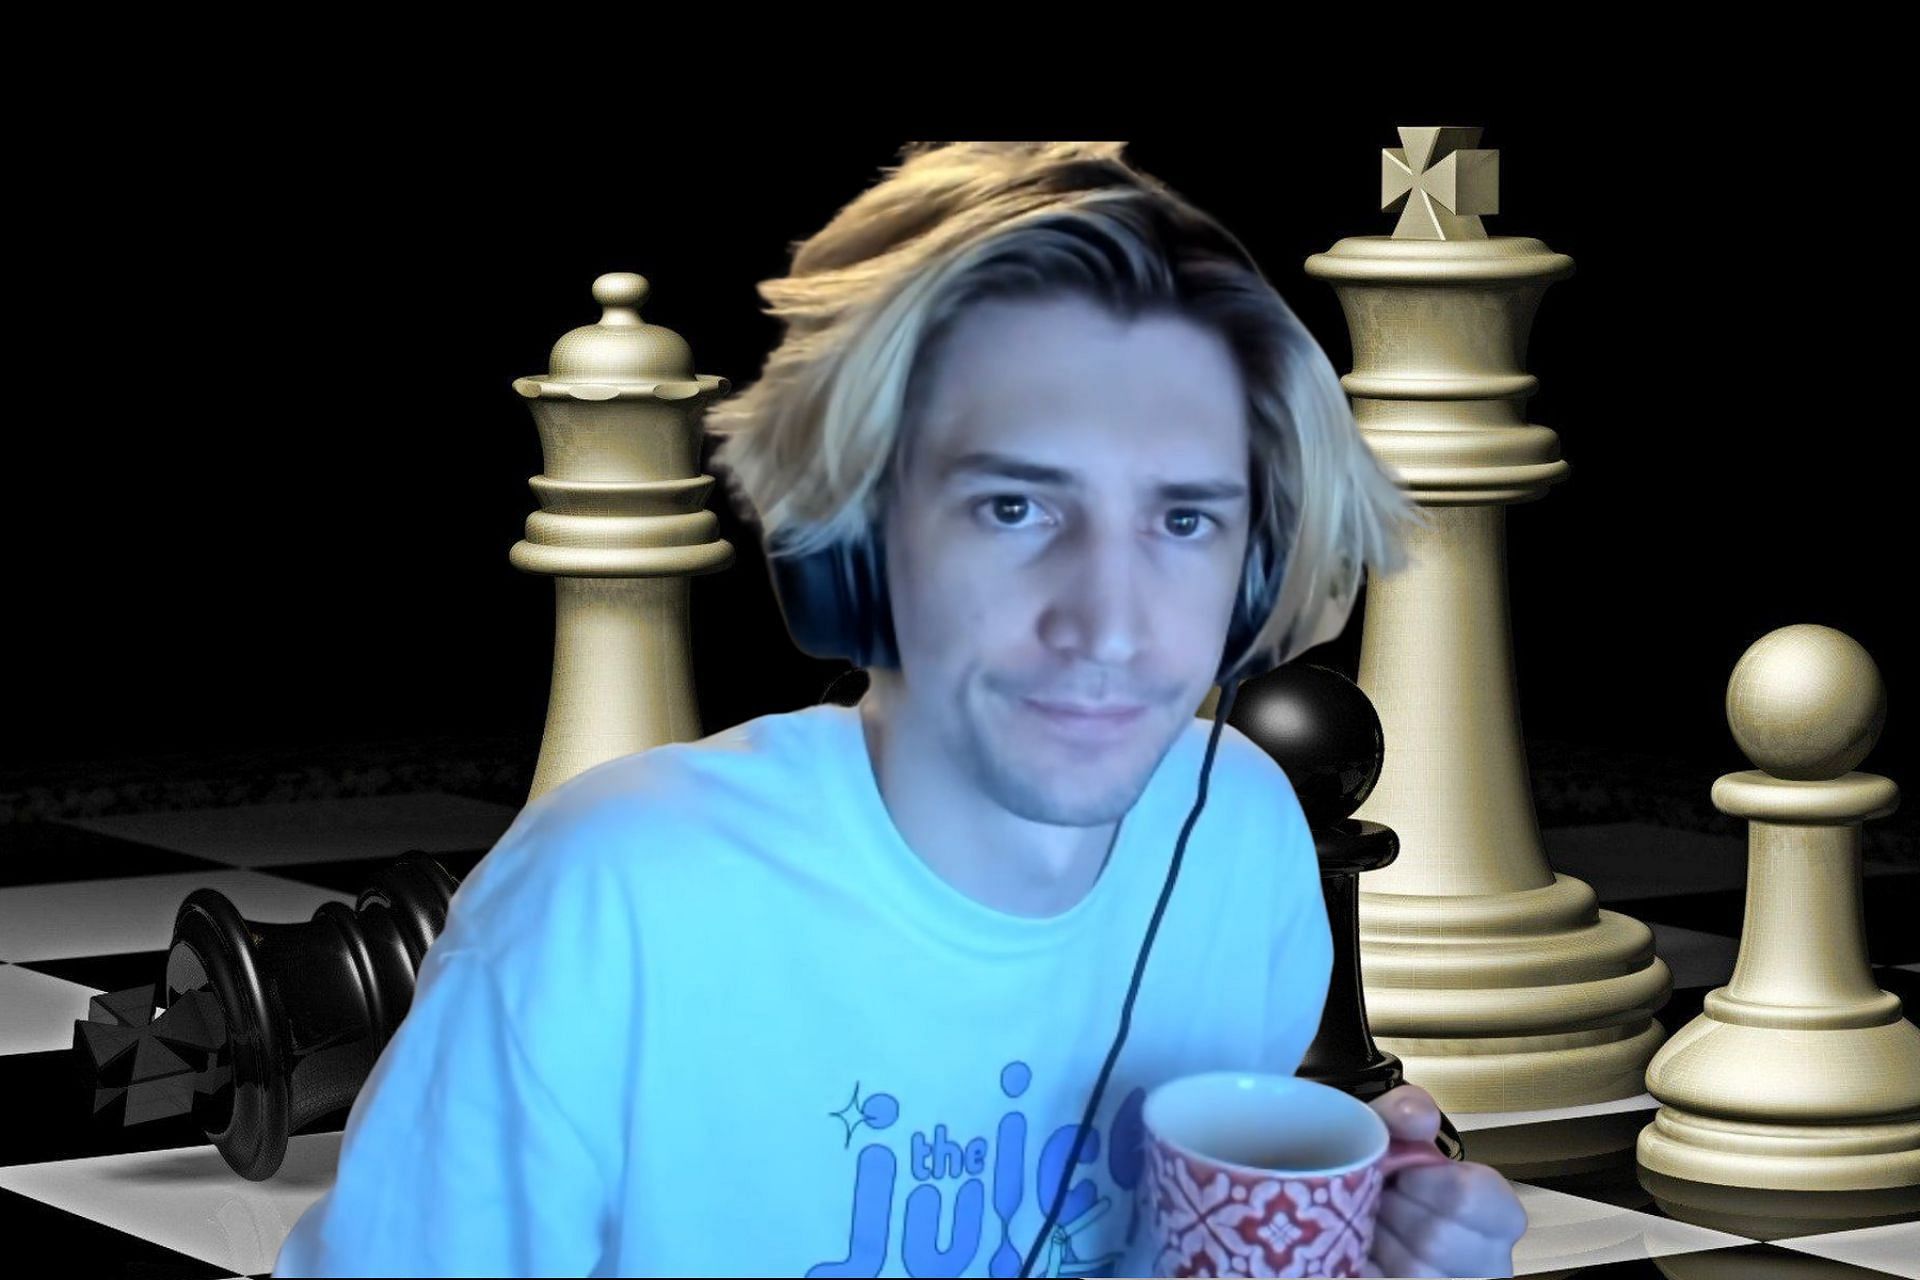 xQc won a classic game of chess, only to be battered in the following matchup (Image via Sportskeeda)